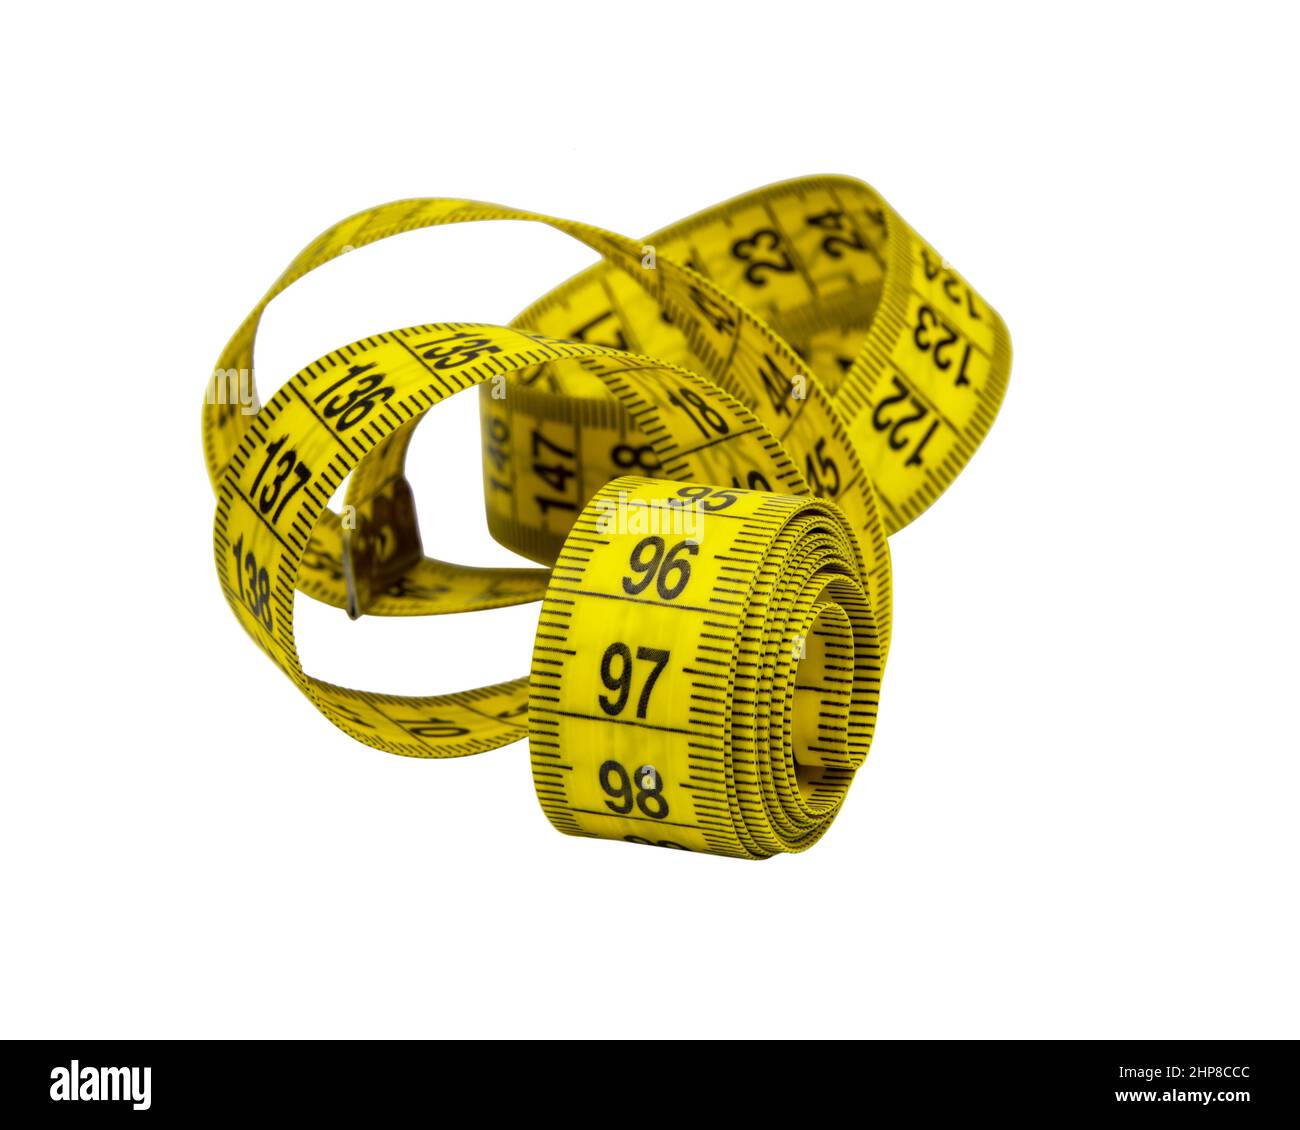 https://c8.alamy.com/comp/2HP8CCC/yellow-tape-measure-isolated-on-the-white-background-2HP8CCC.jpg